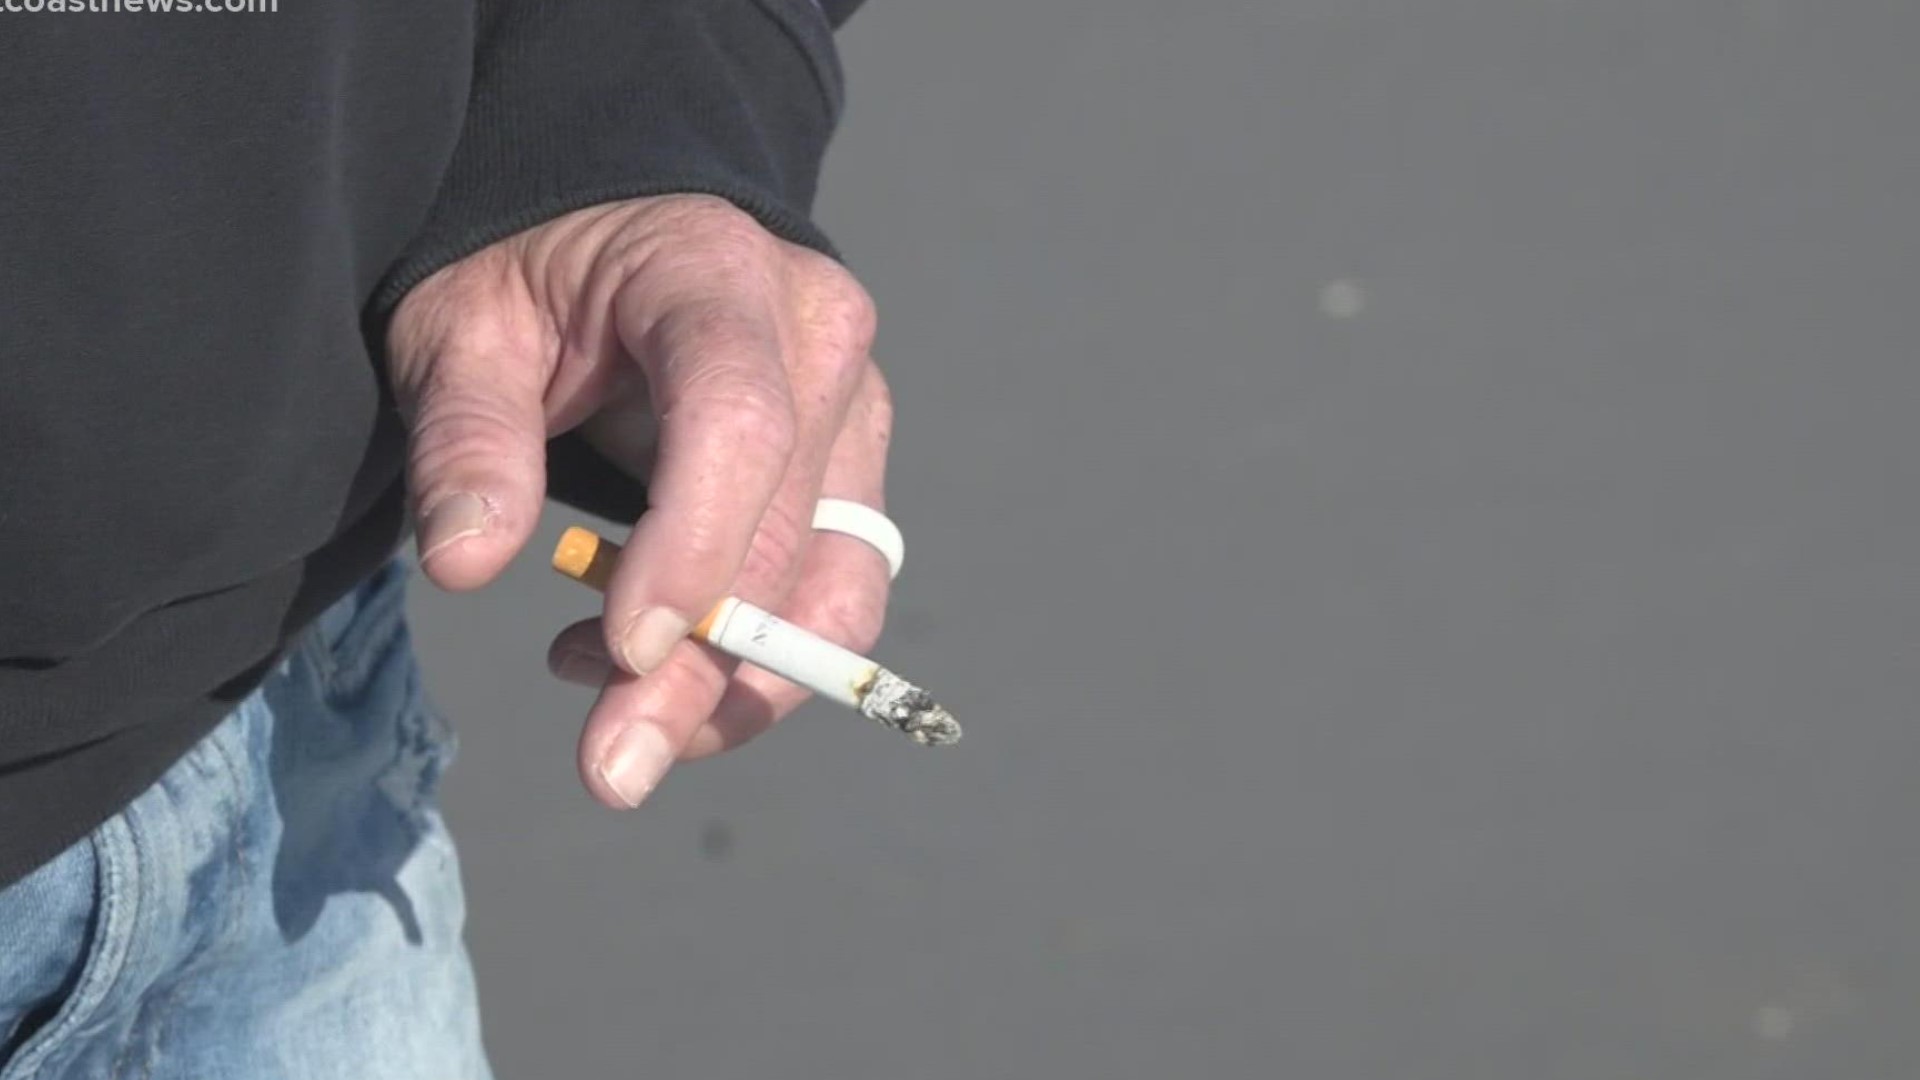 The bill would give local governments the authority to ban smoking at beaches and state parks.